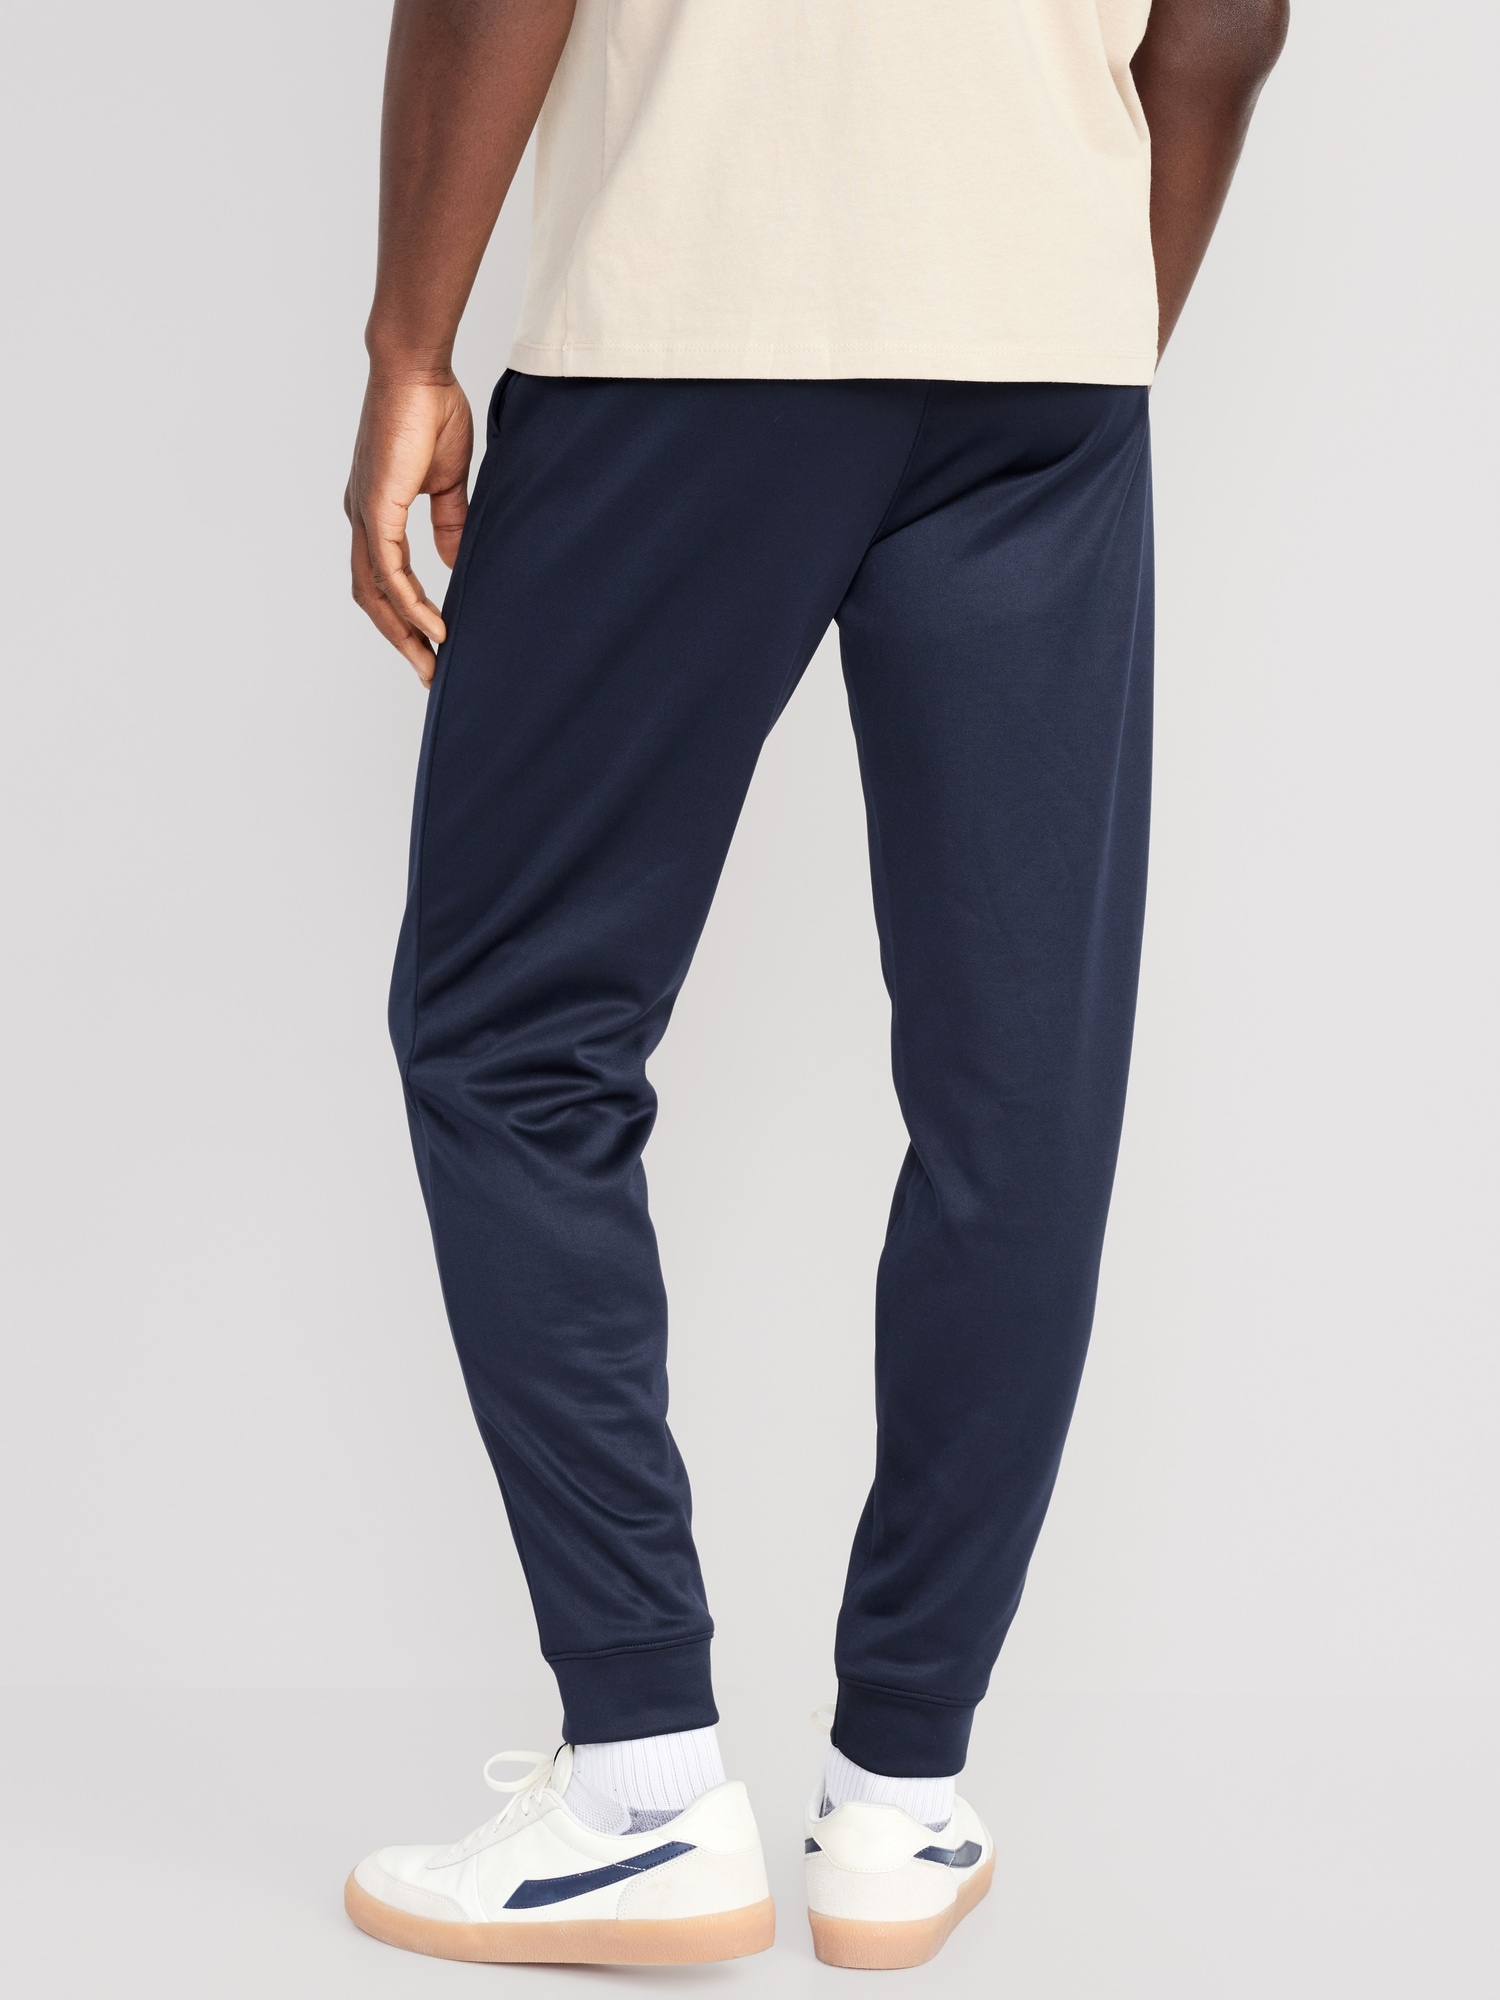 Go-Dry Performance Jogger Sweatpants | Old Navy